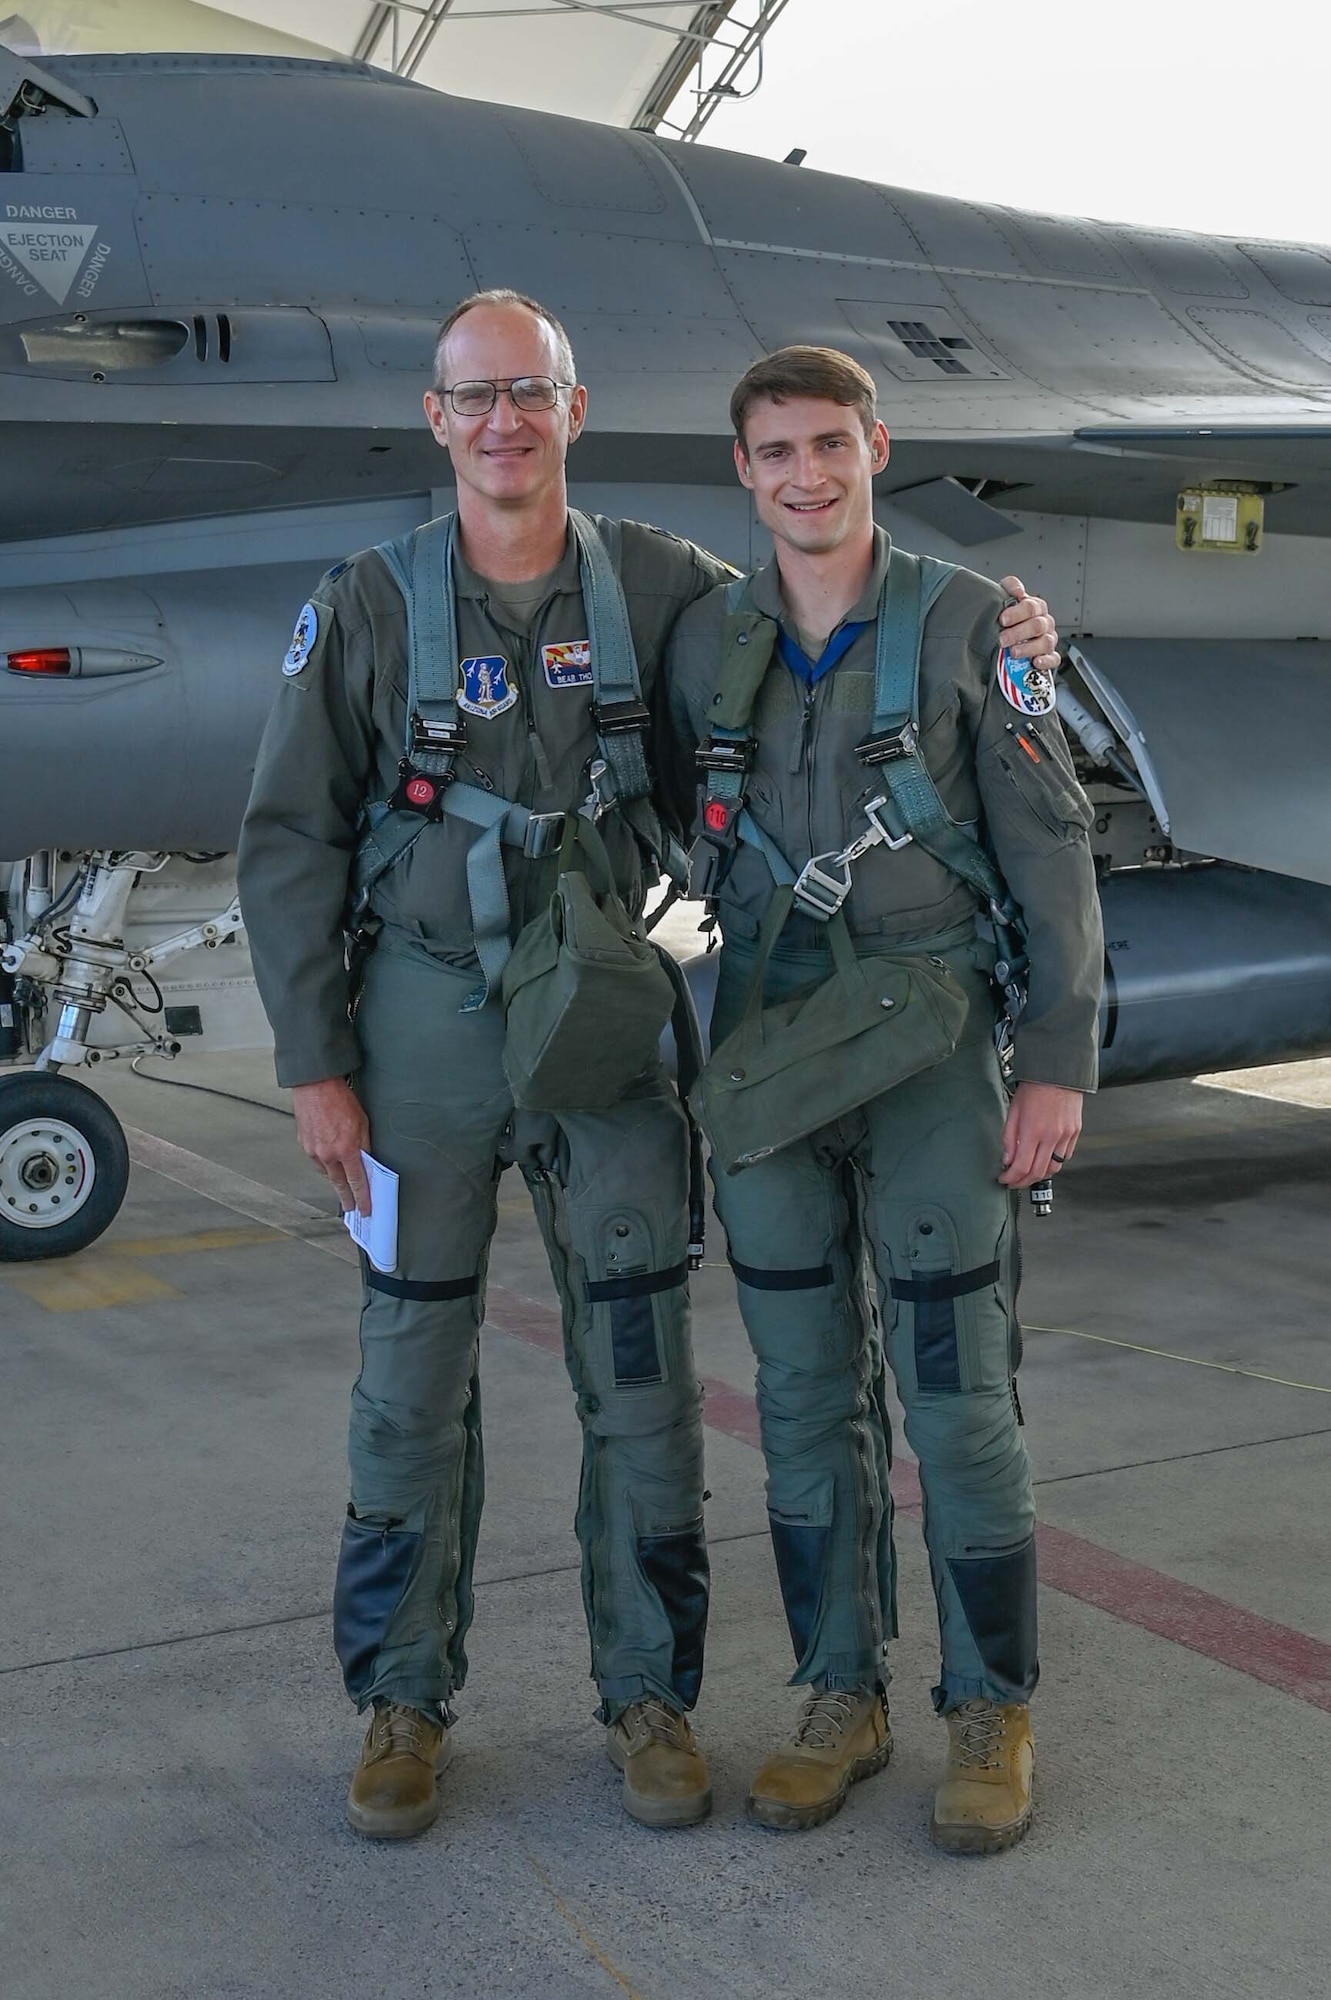 Lt. Col. Joseph Thomas, a Drill Status Guardsman F-16 instructor pilot with the 162nd Wing in Tucson, Ariz., and his son, 1st Lt. Nathan Thomas, an active-duty F-16 student pilot, prepare to fly a training mission in the F-16 Fighting Falcon. (U.S. Air National Guard photo by Maj. Angela Walz)